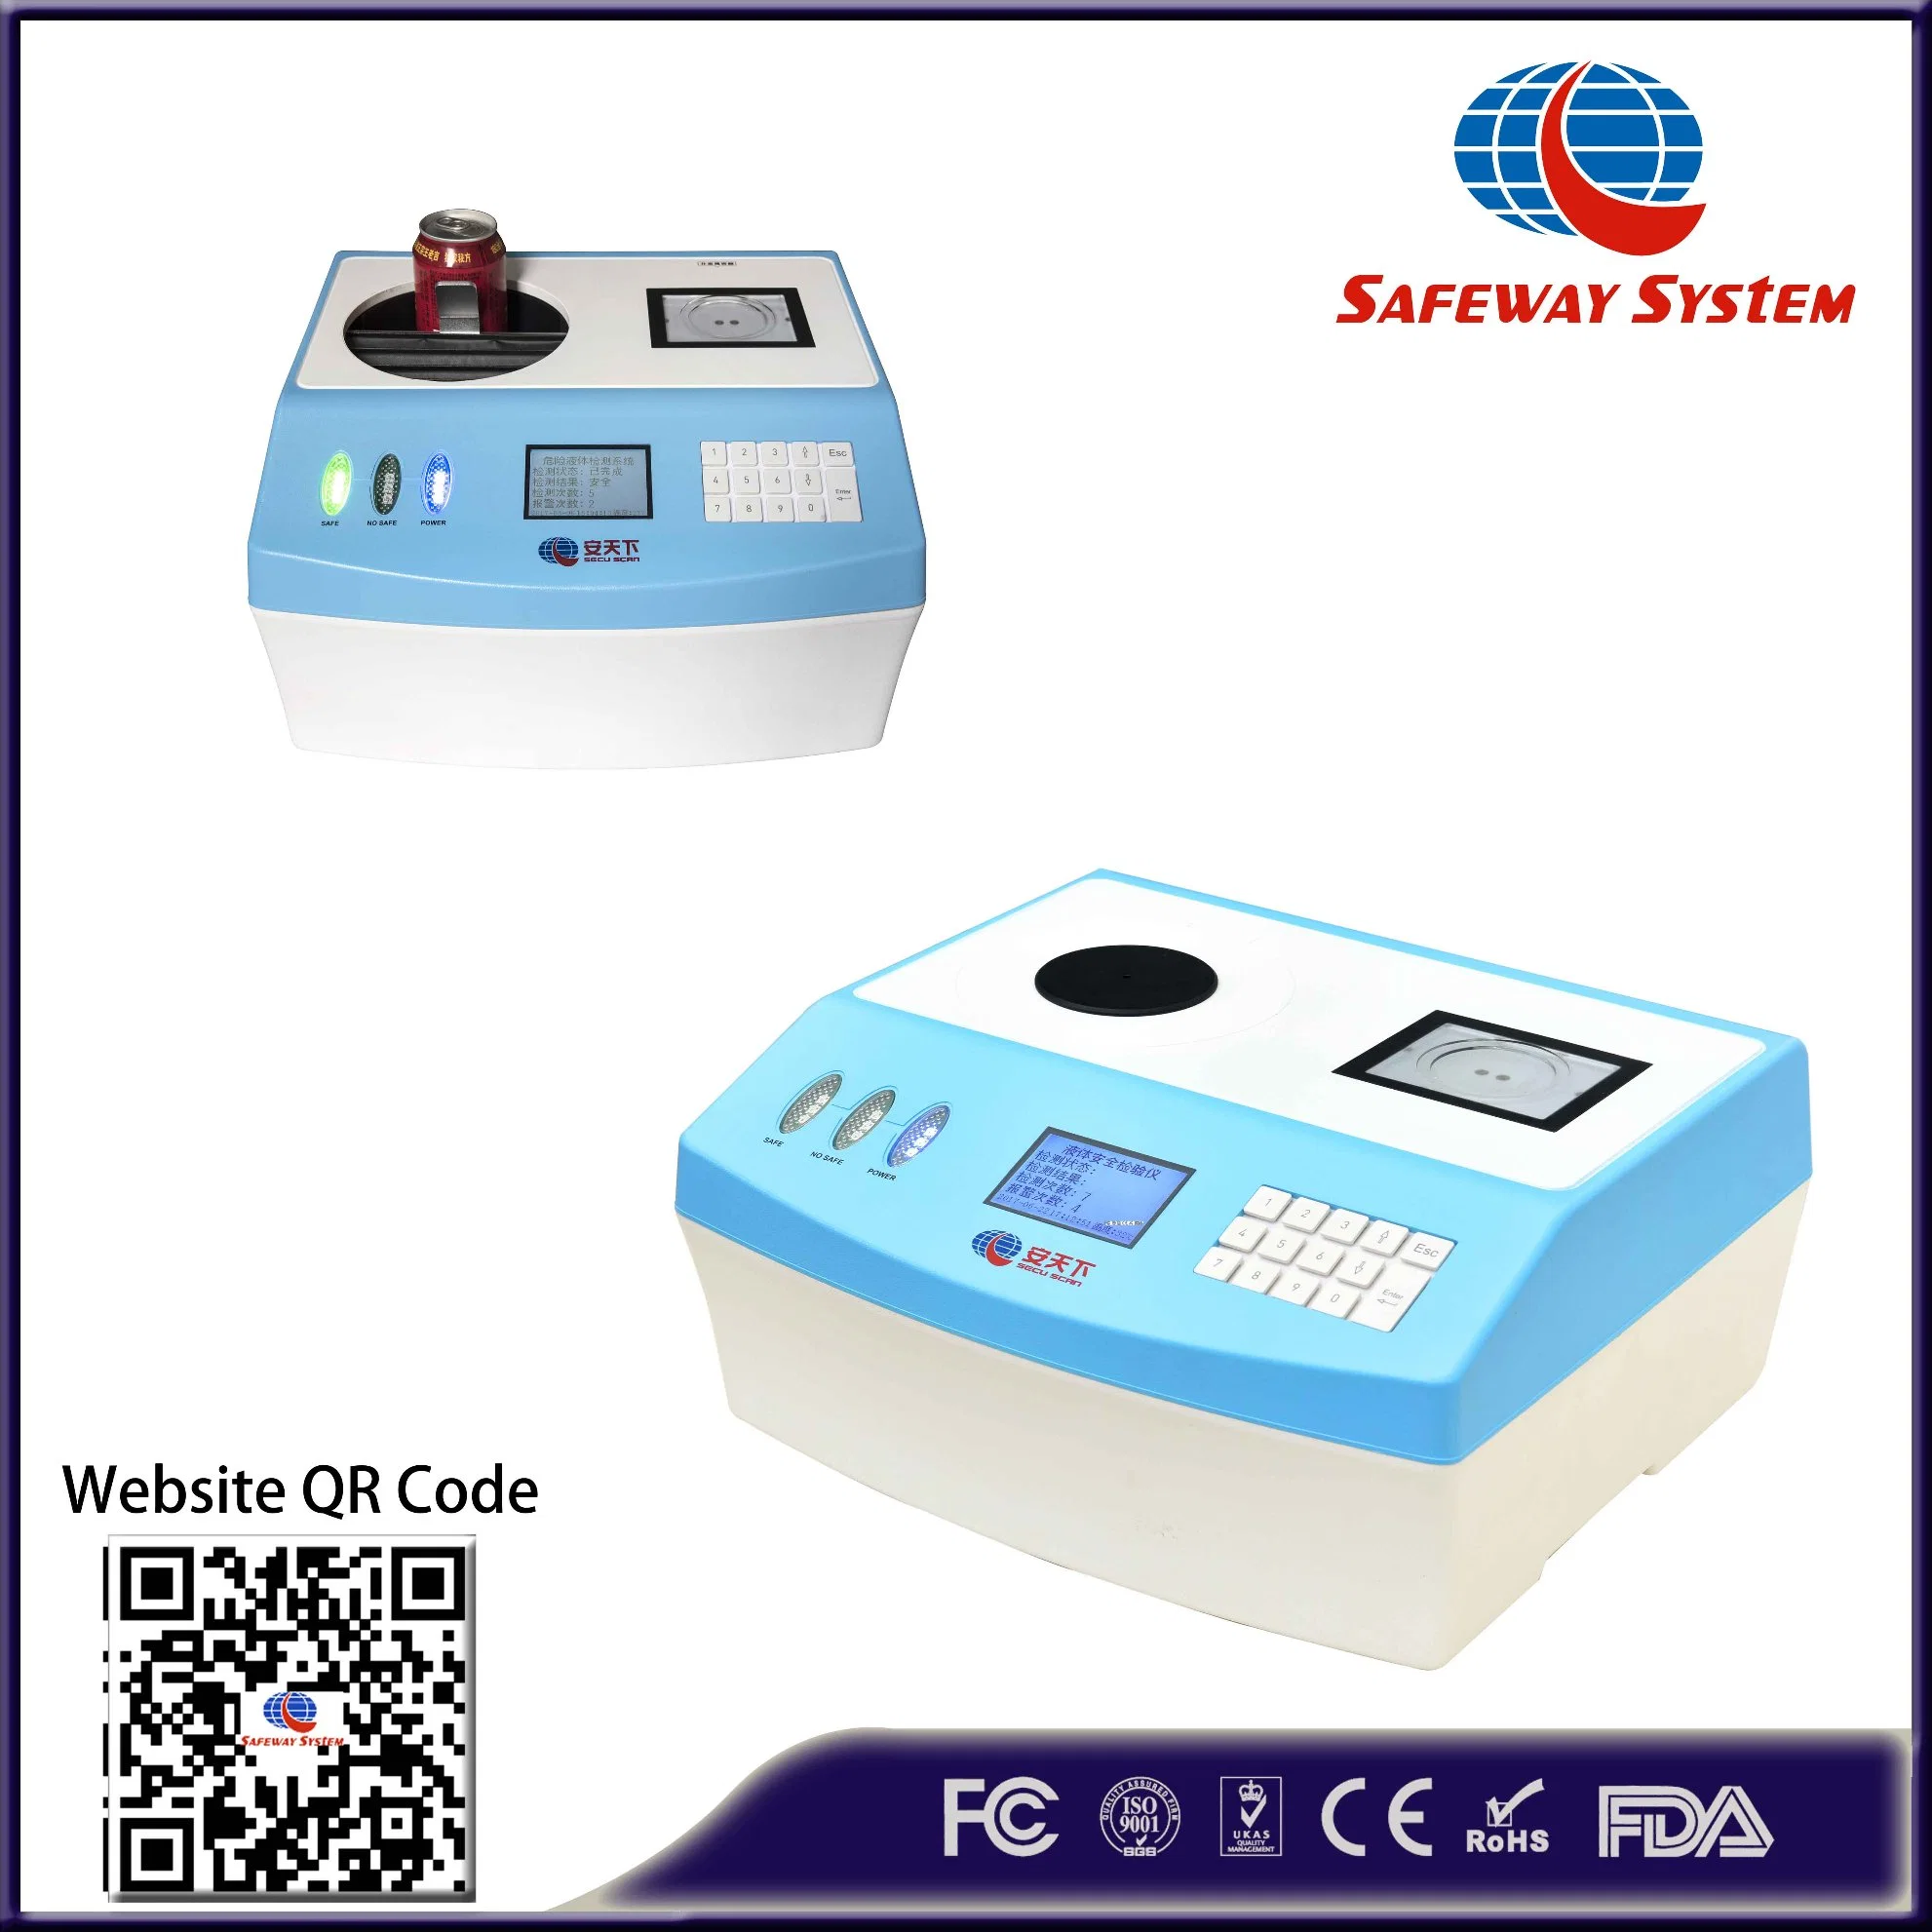 New Stationery Desktop Dangerous Liquid Explosive Detector, Liquid Scanner Liquid Trace Detector Direct Factory in China with Copyrights and Patents